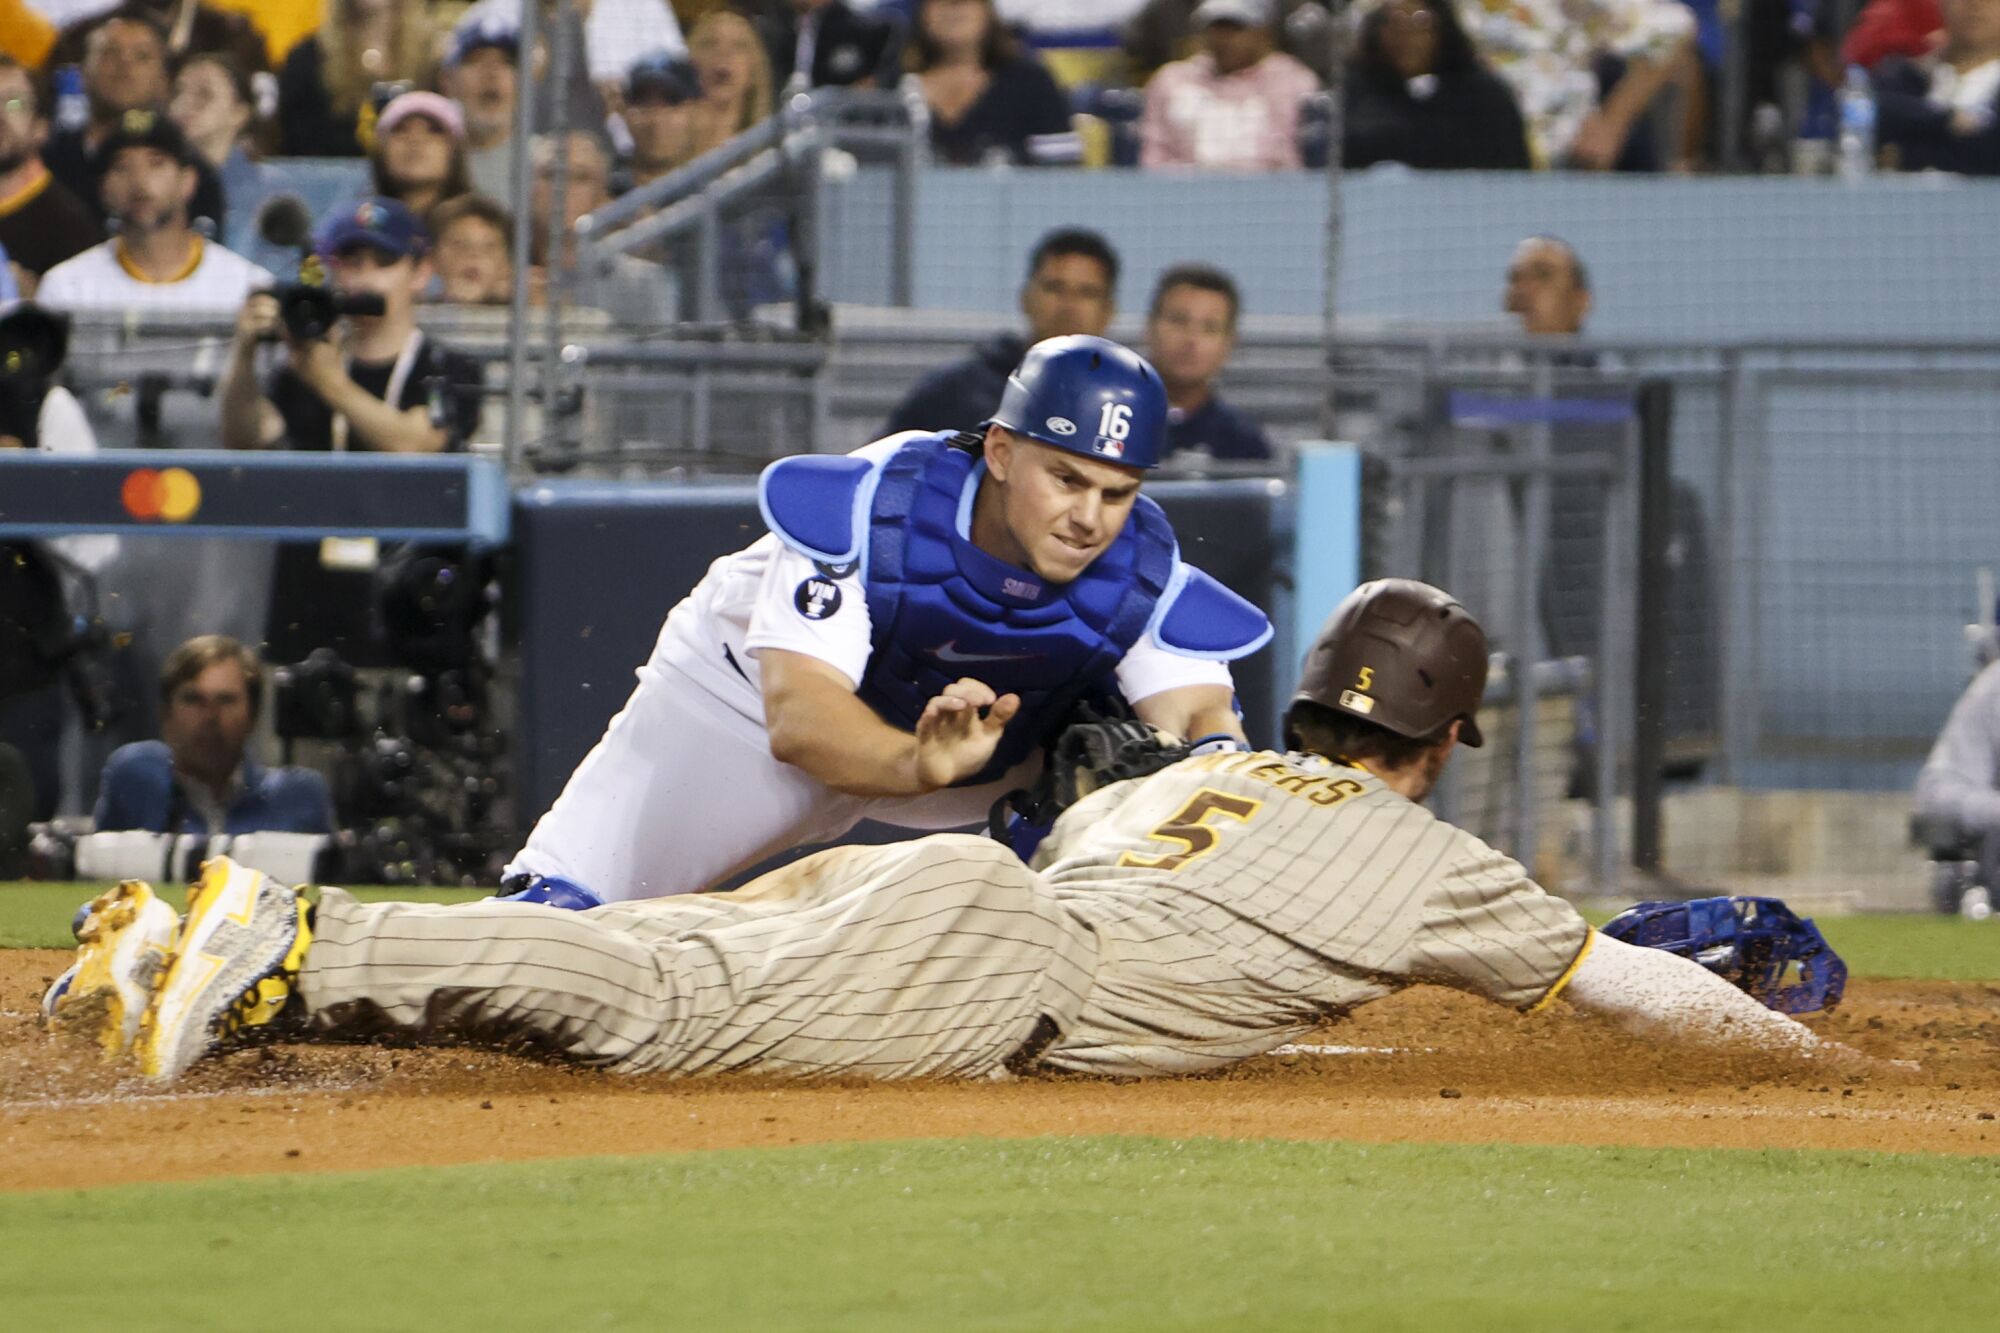  Dodgers catcher Will Smith tags out  Padres' Wil Myers at home plate during the sixth inning.